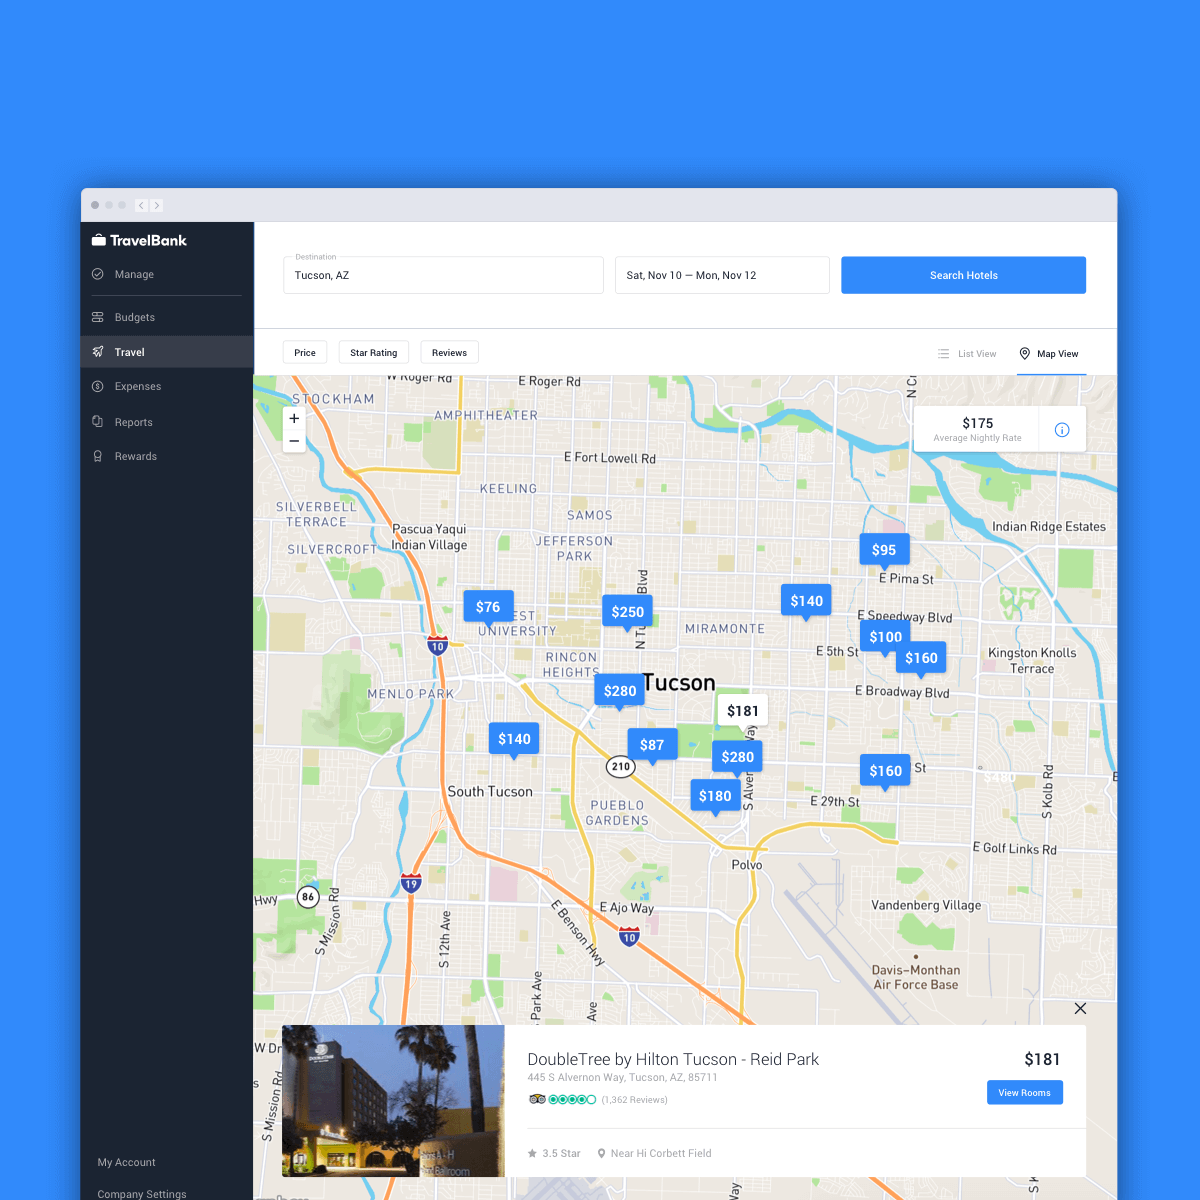 Hotel filters allow users to filter by price, star ratings, and reviews on both list and map views of the hotels search results